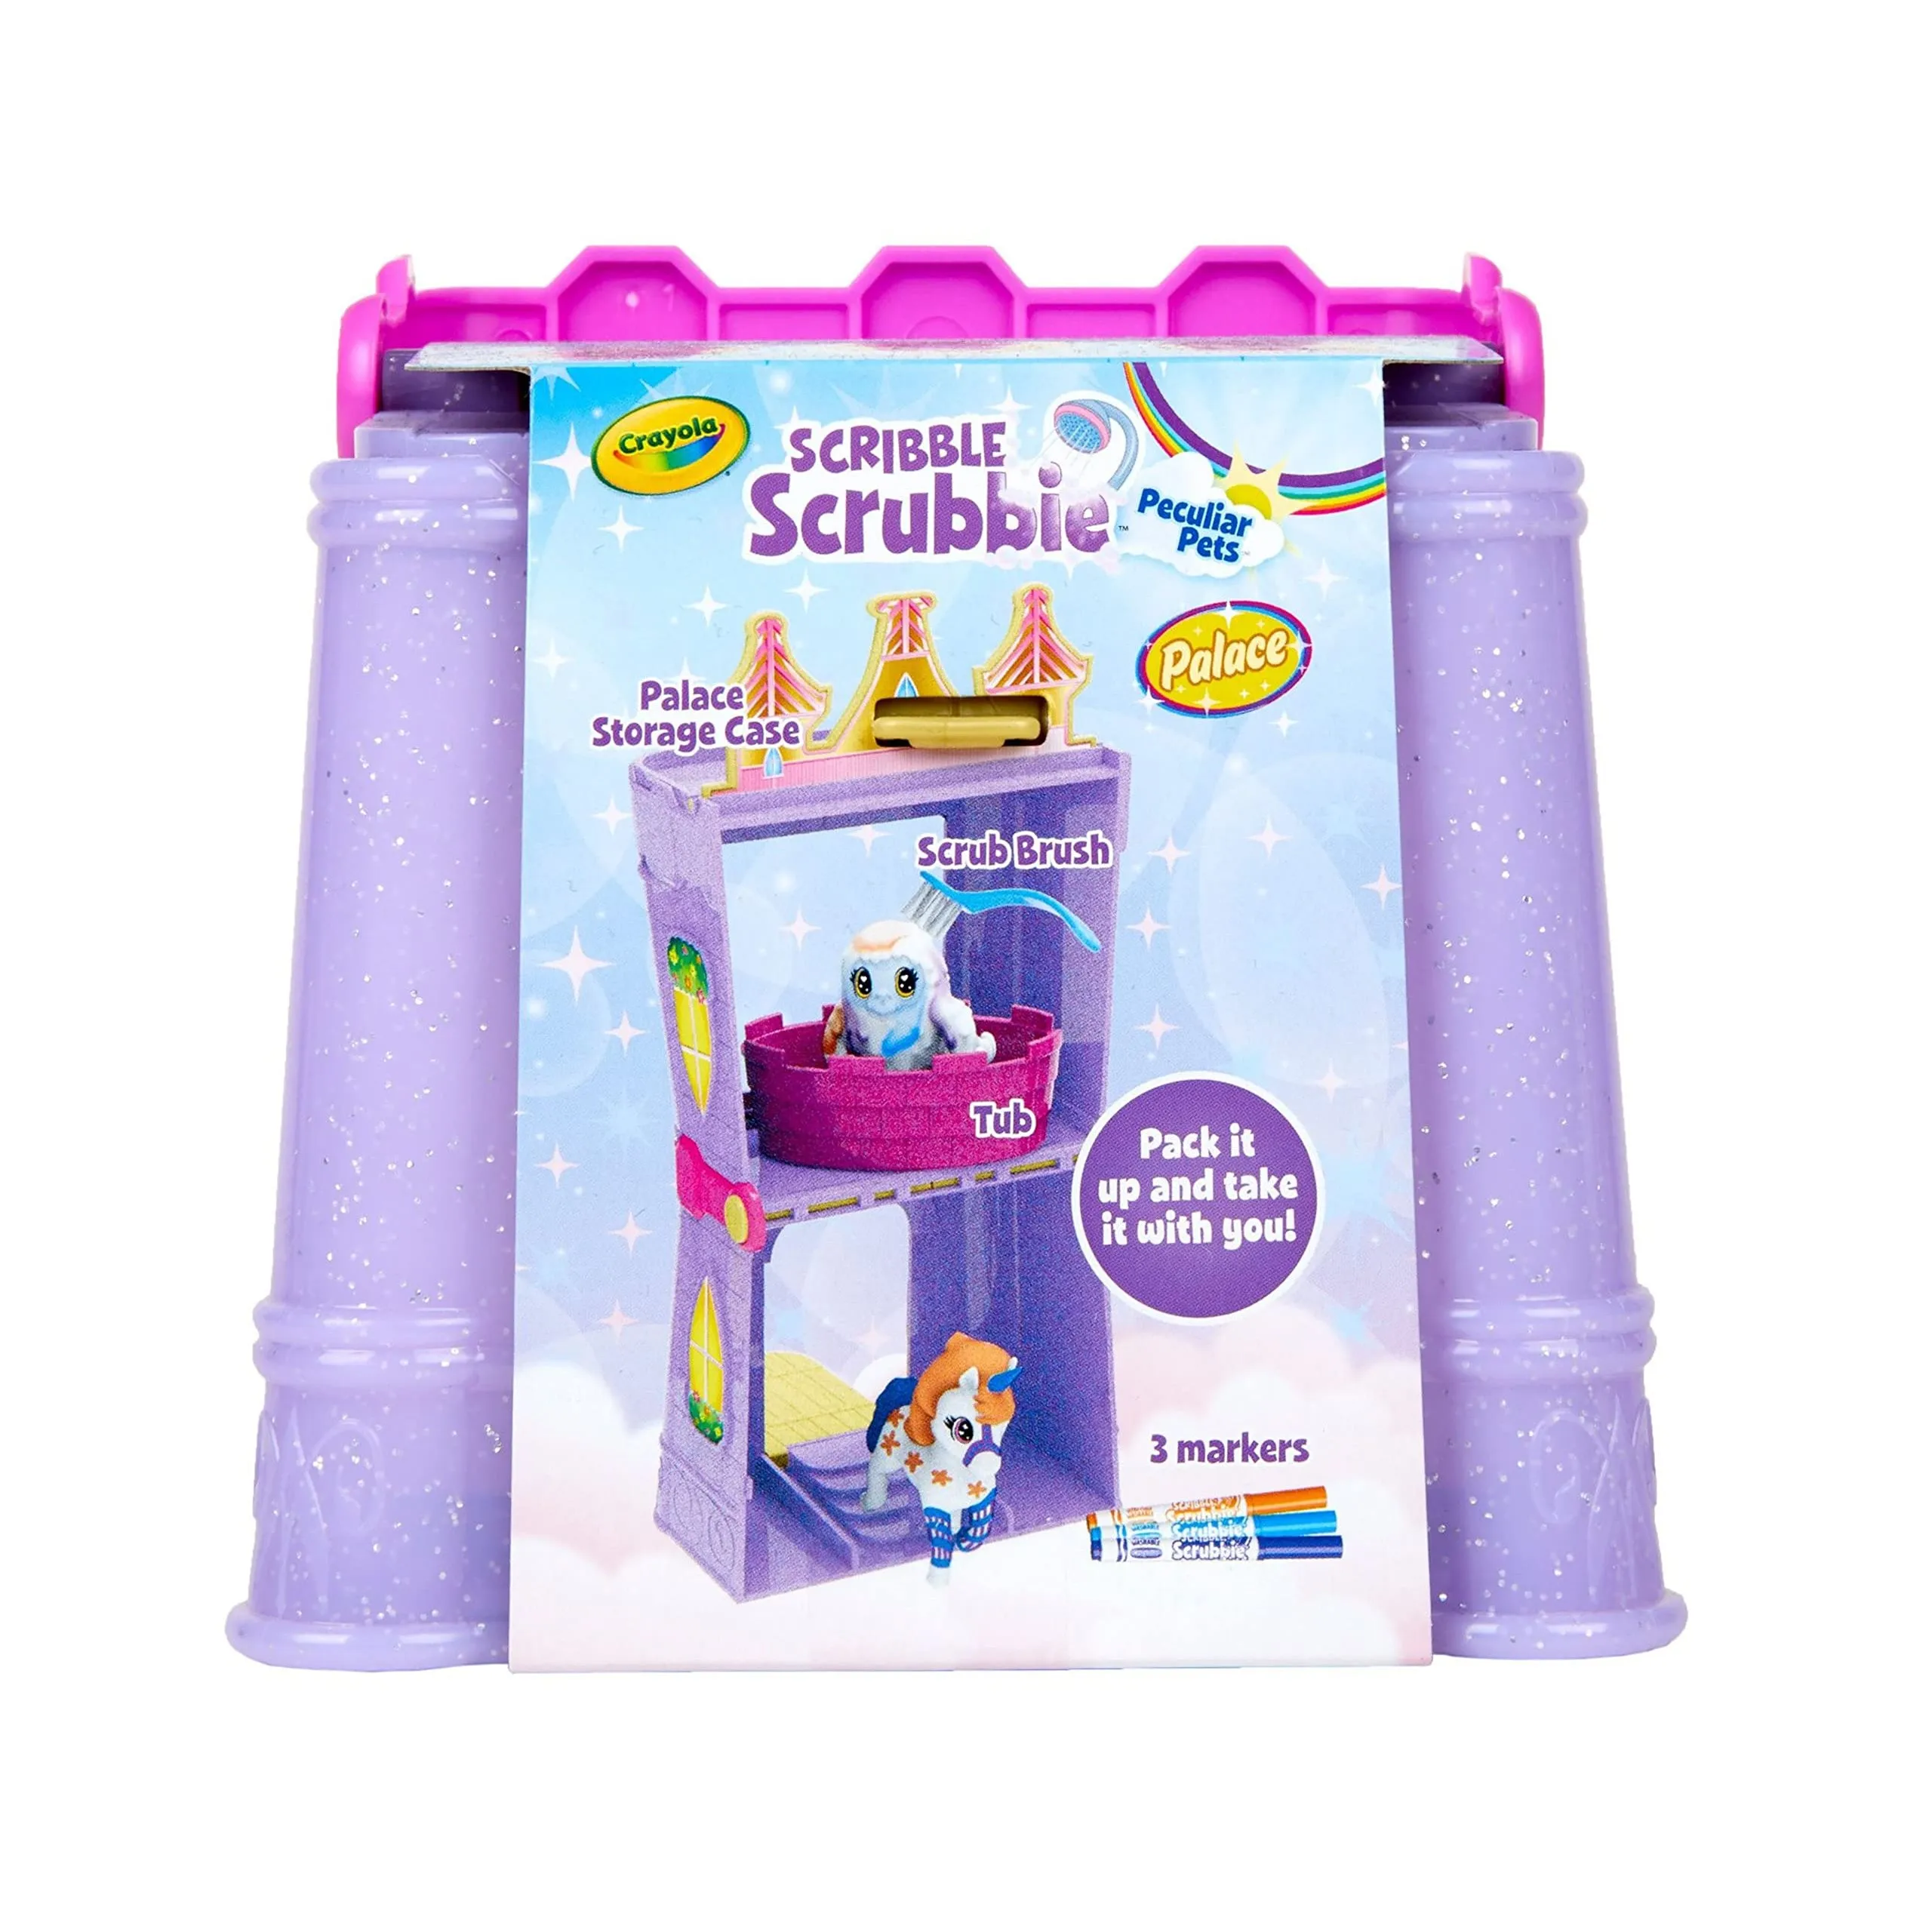 Crayola Variety Bubble Adorable Pet Supplement Pack Scribble Scrubbie Pets  Cats Kids Toys Gift for Girls & Boys Age 3, 4, 5, 6 - AliExpress